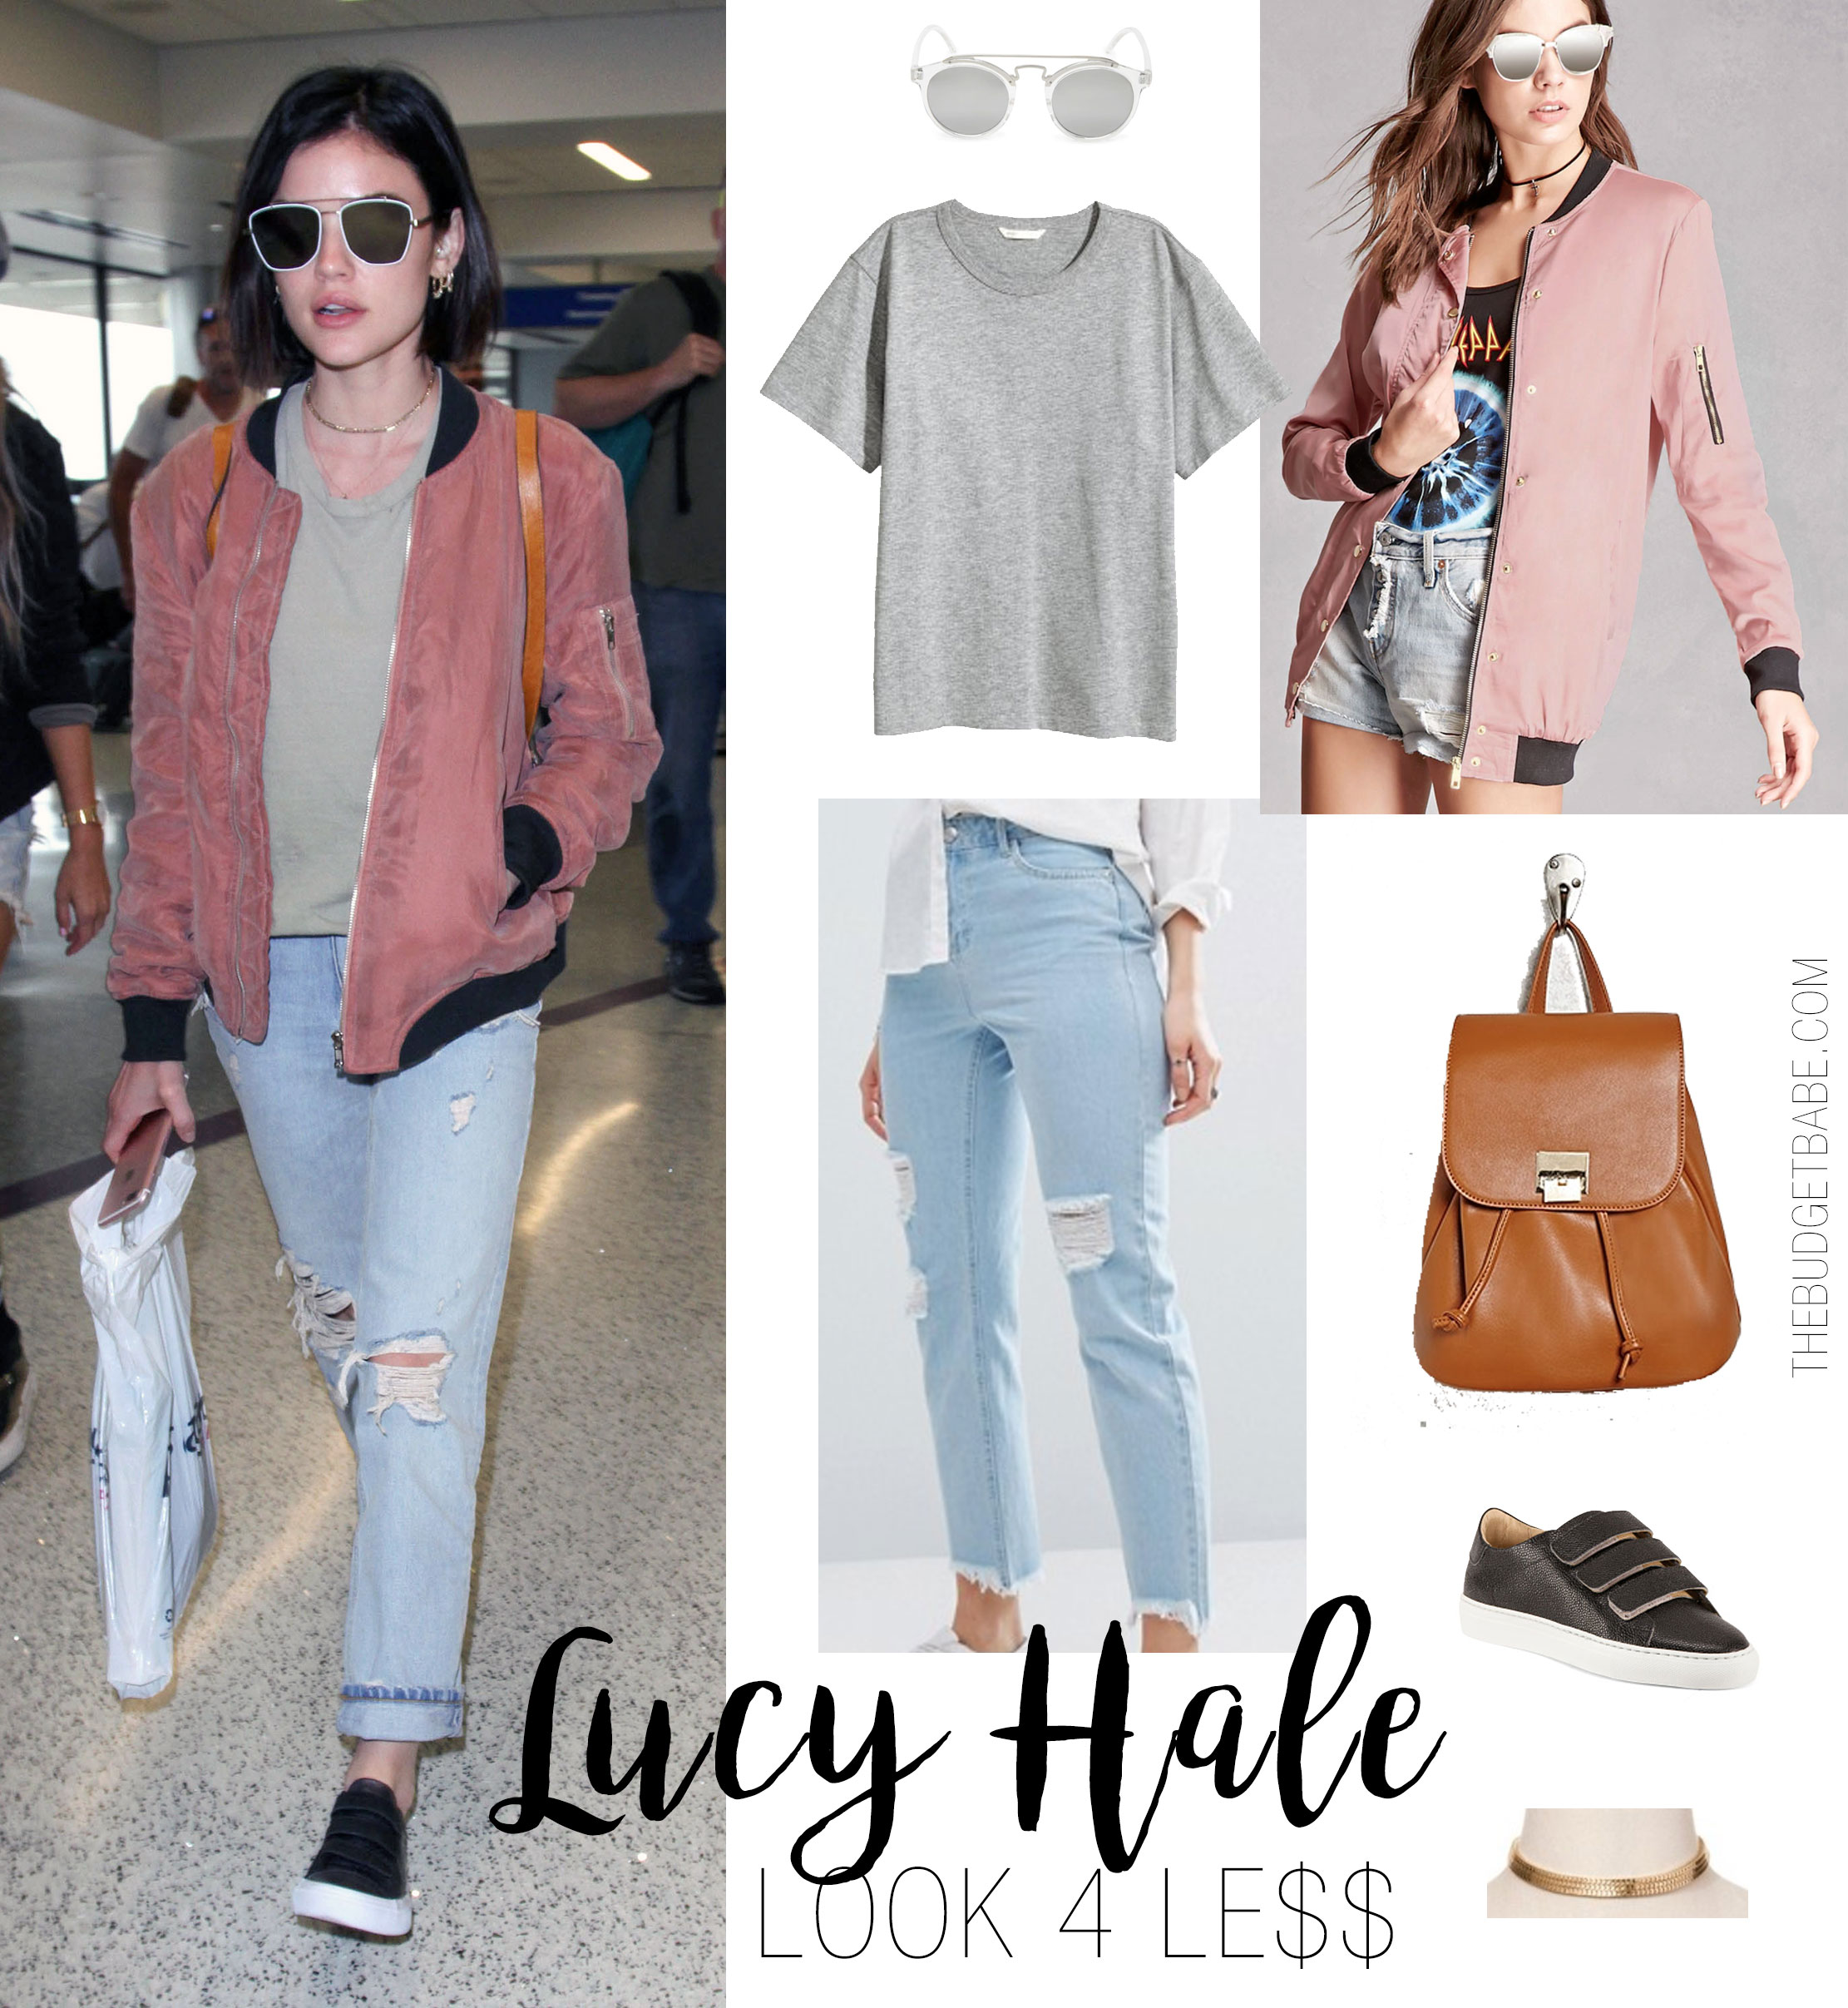 Lucy Hale's airport style is a comfy blush pink bomber and boyfriend jeans.